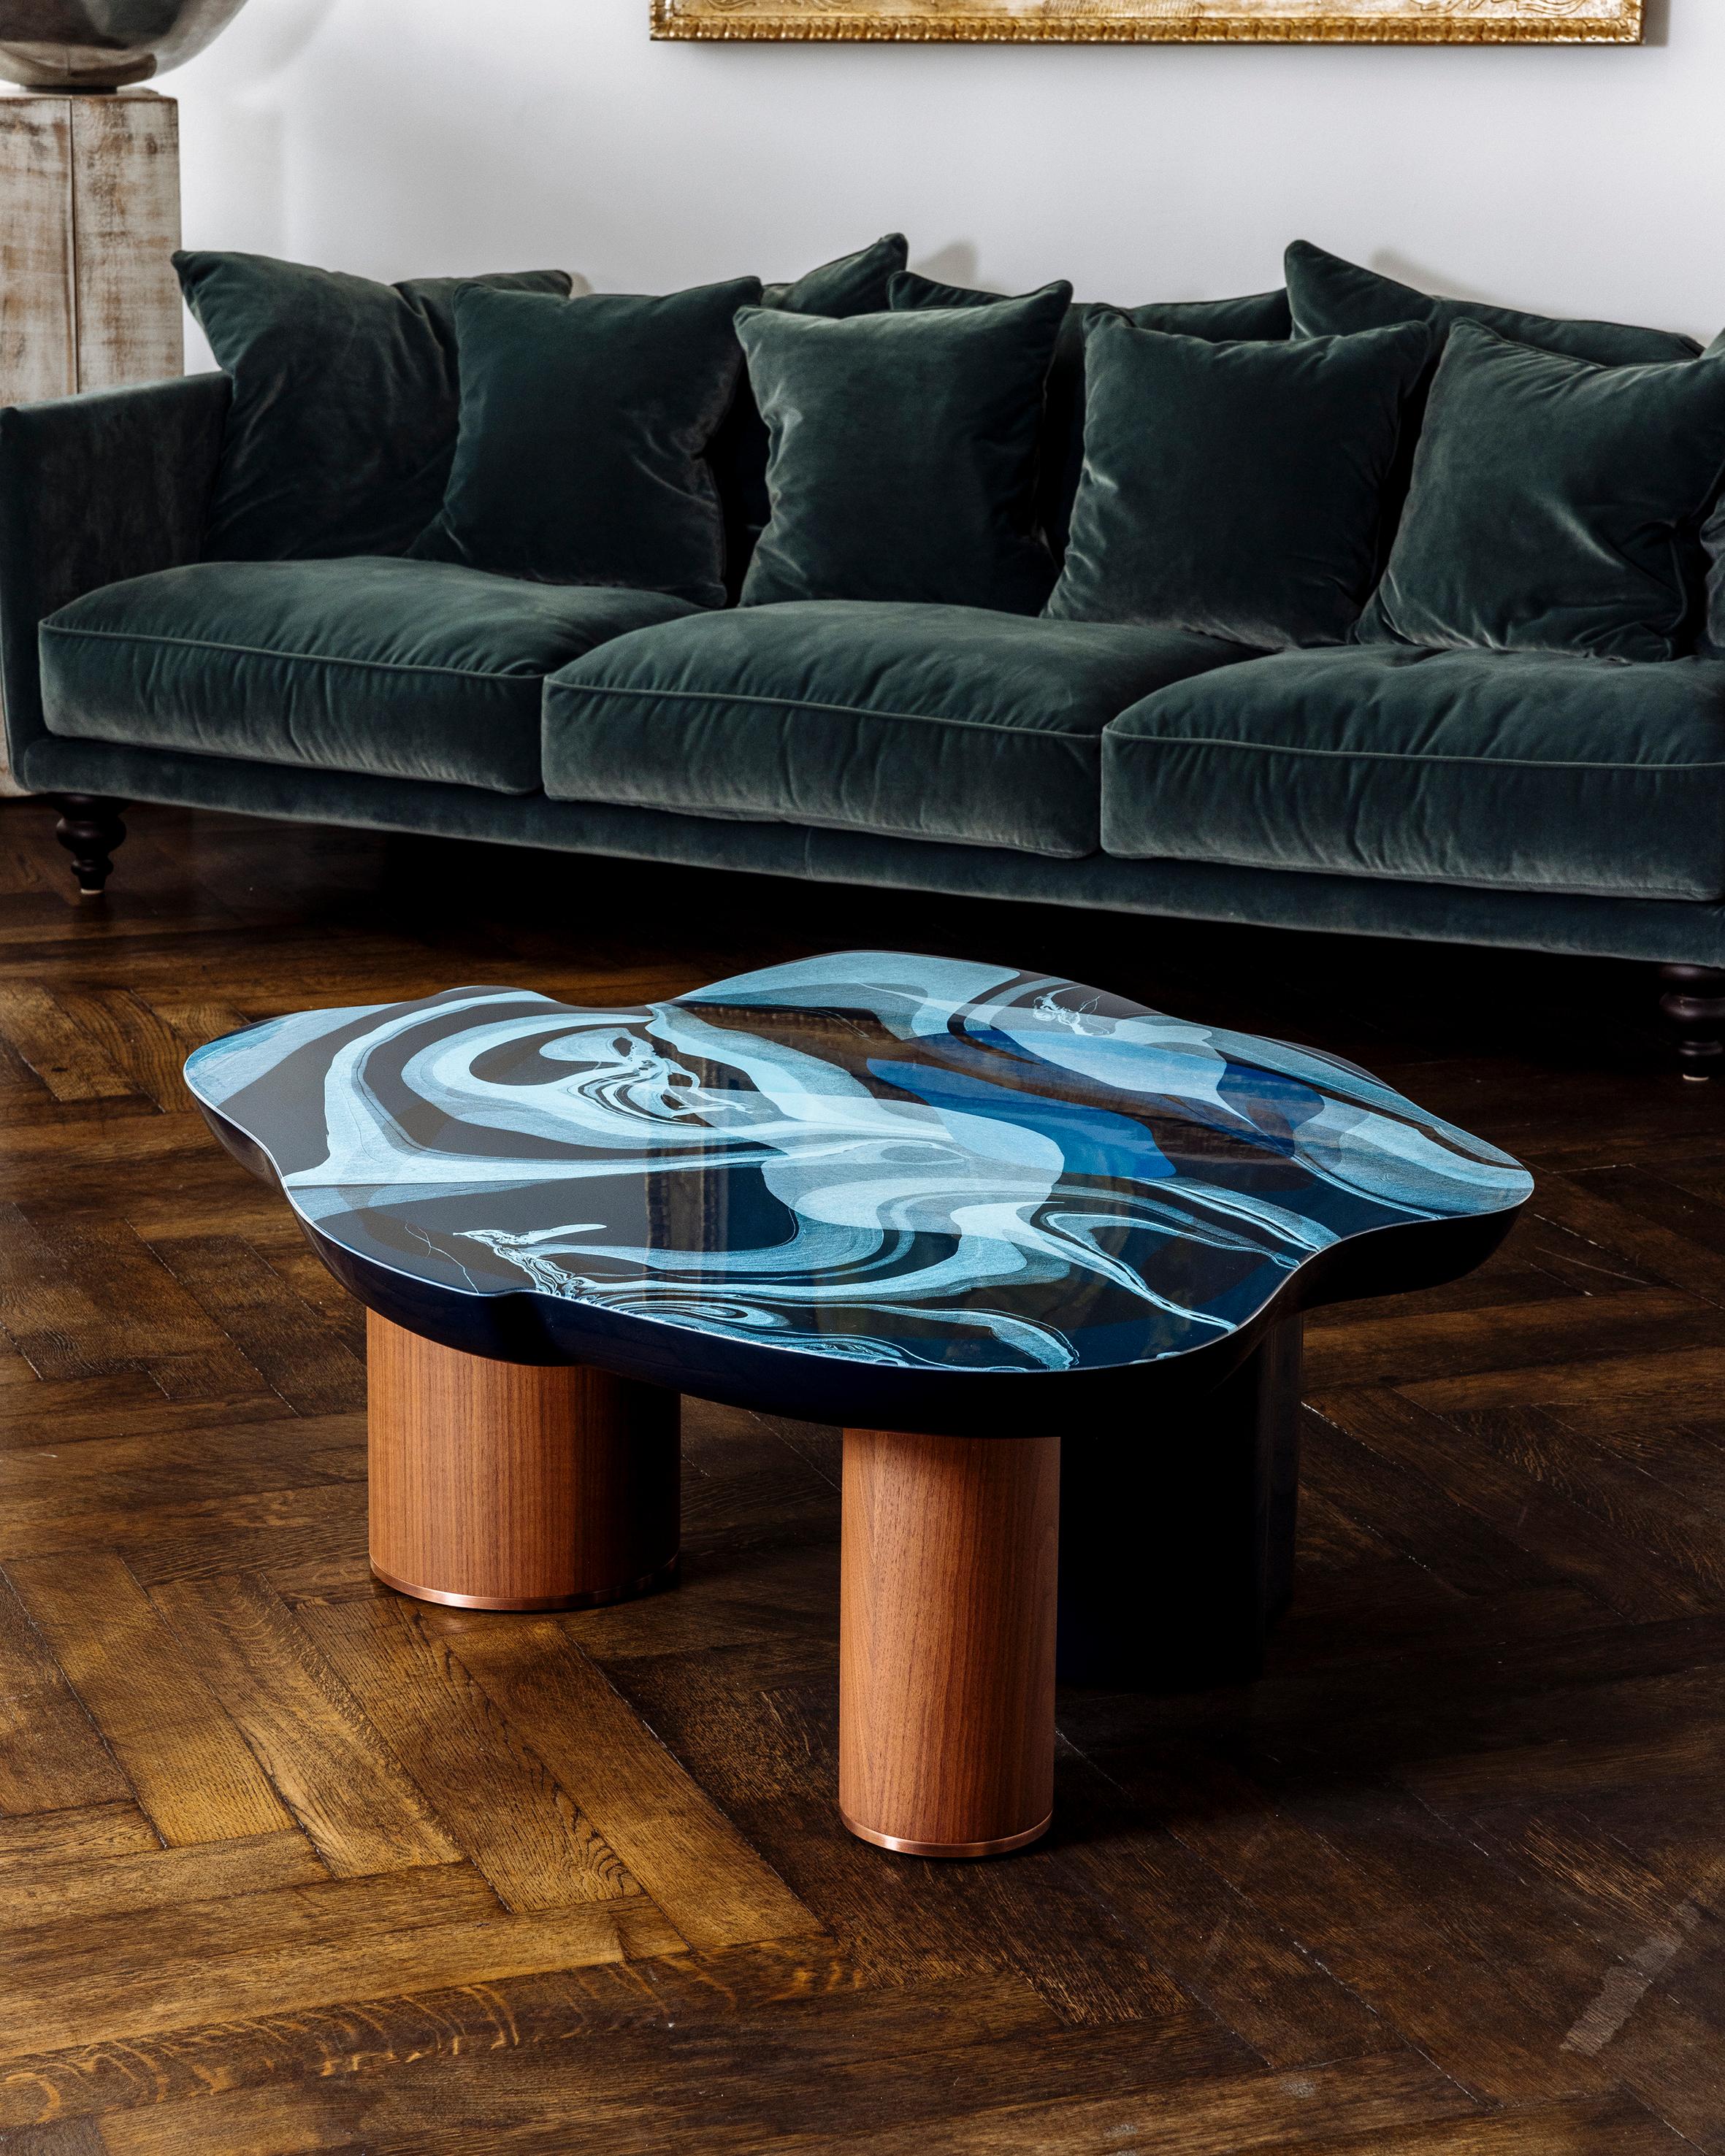 Ahu's sculptural Ka’Ve tables are designed to be statement pieces for any room, with their shapes drawn directly from co-founder Eda Akaltun’s fluid marbling artworks. 

The Ka’Ve 01 Bosphorus is handmade in a limited edition, with a high gloss